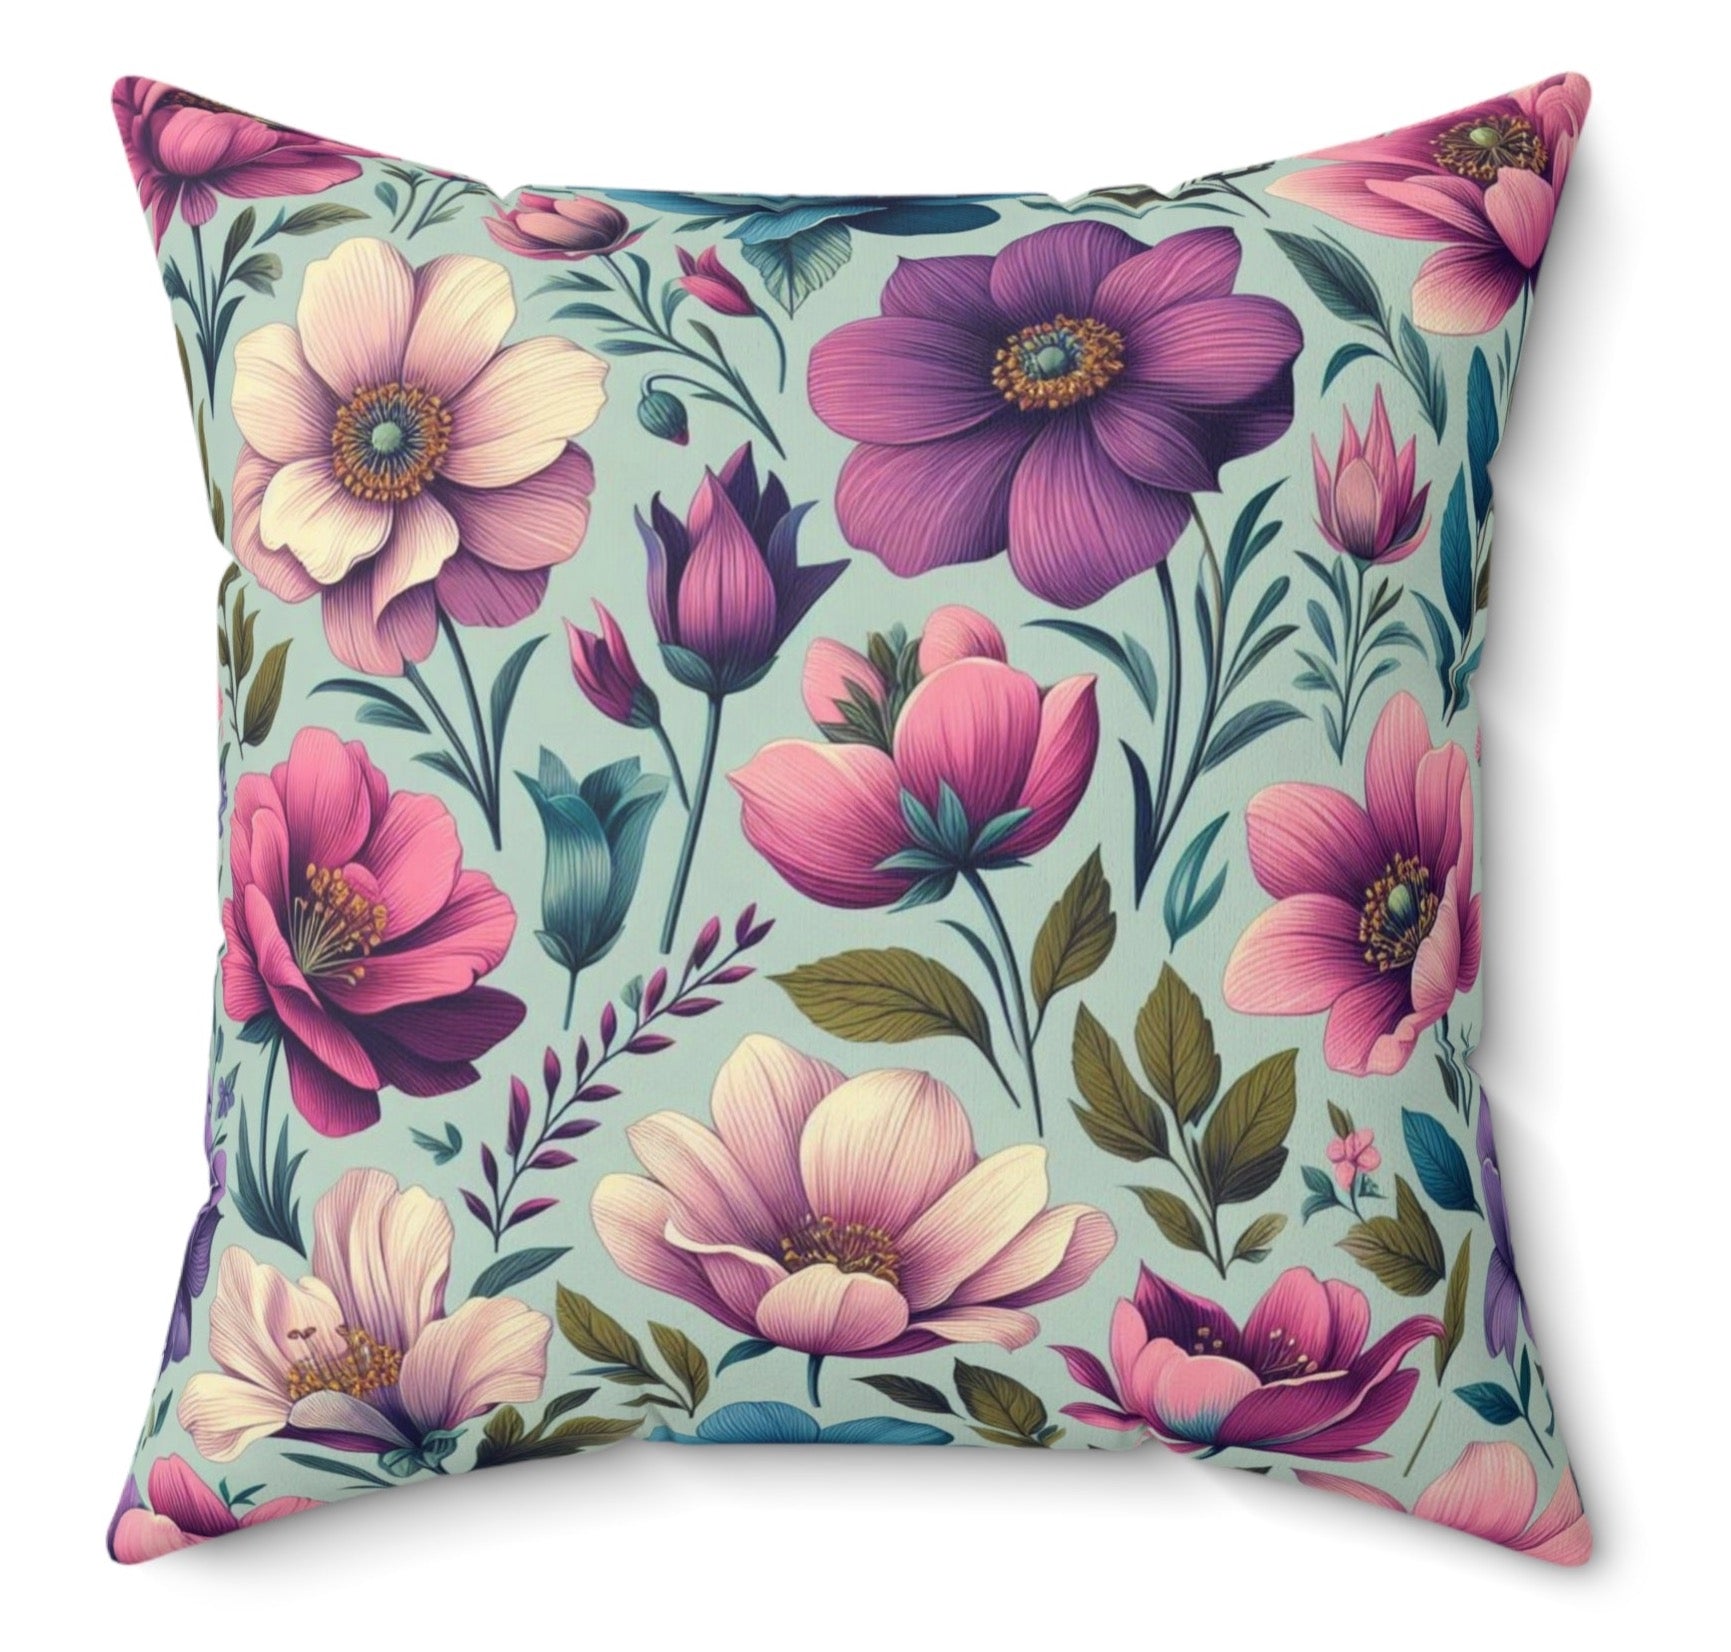 Purple Floral Vintage Floral Throw Pillow Botanical Pink Boho Maximalist Style Polyester Cushion Square Cover